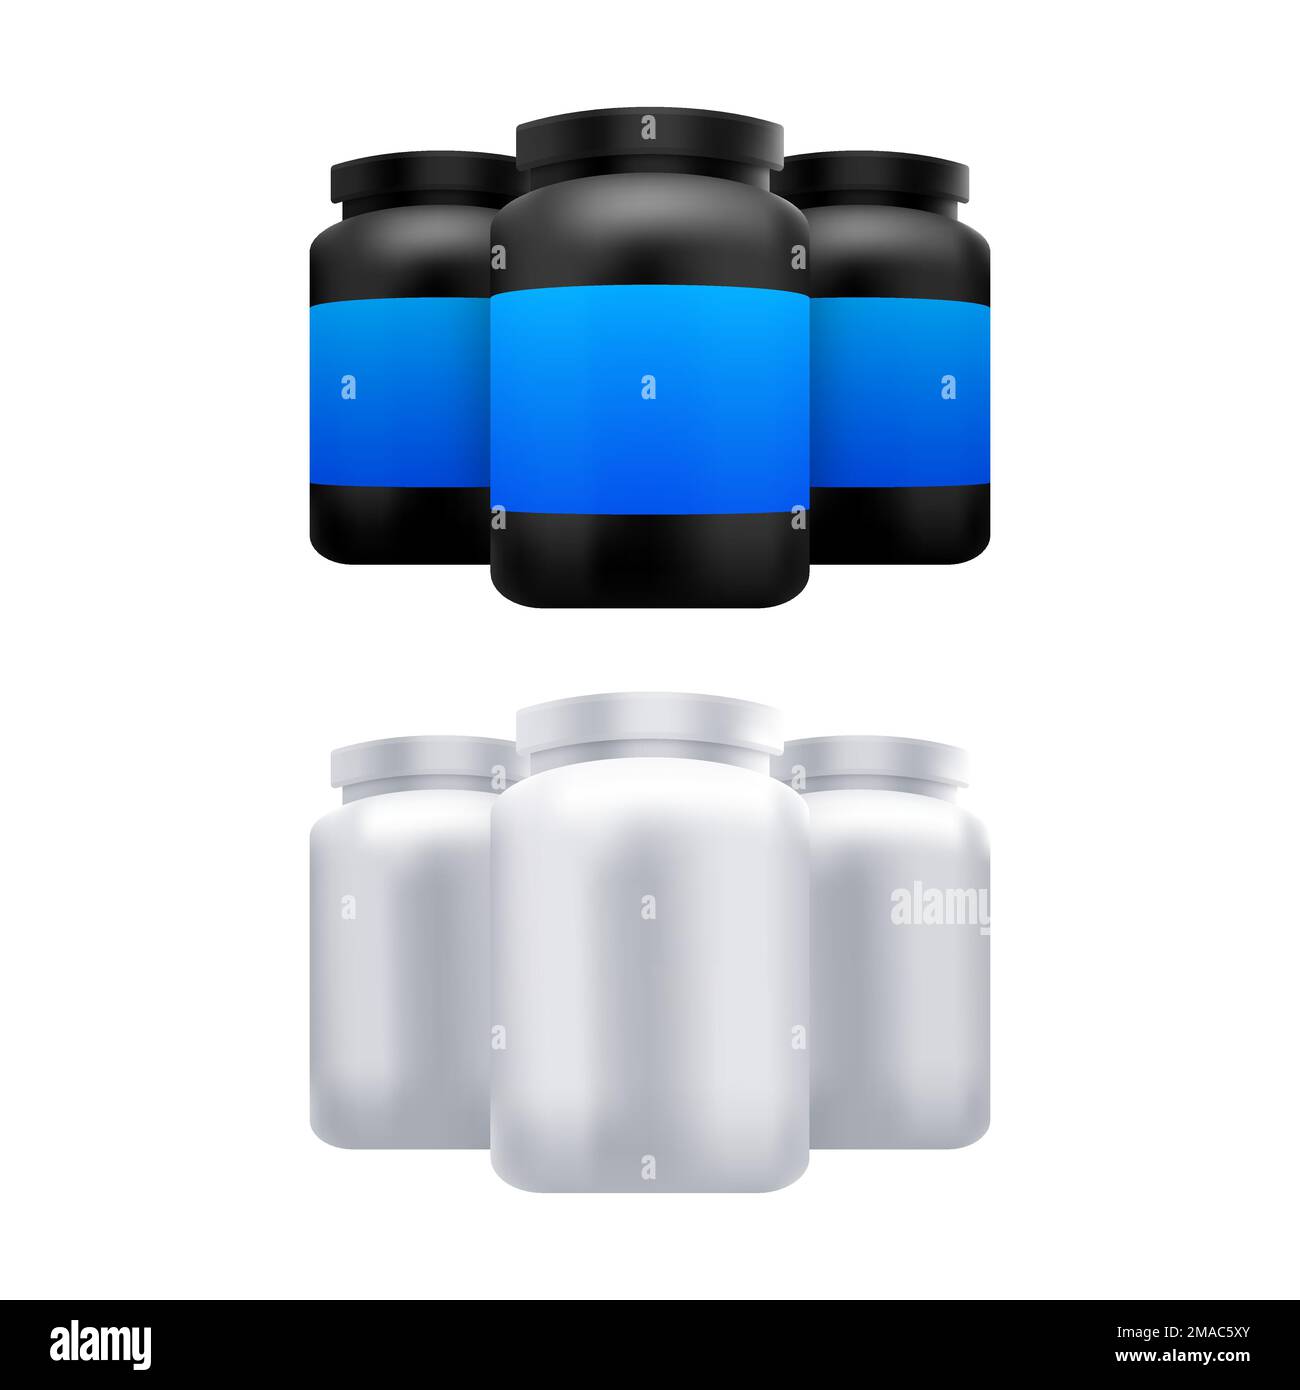 Protein Container Vector Art PNG Images